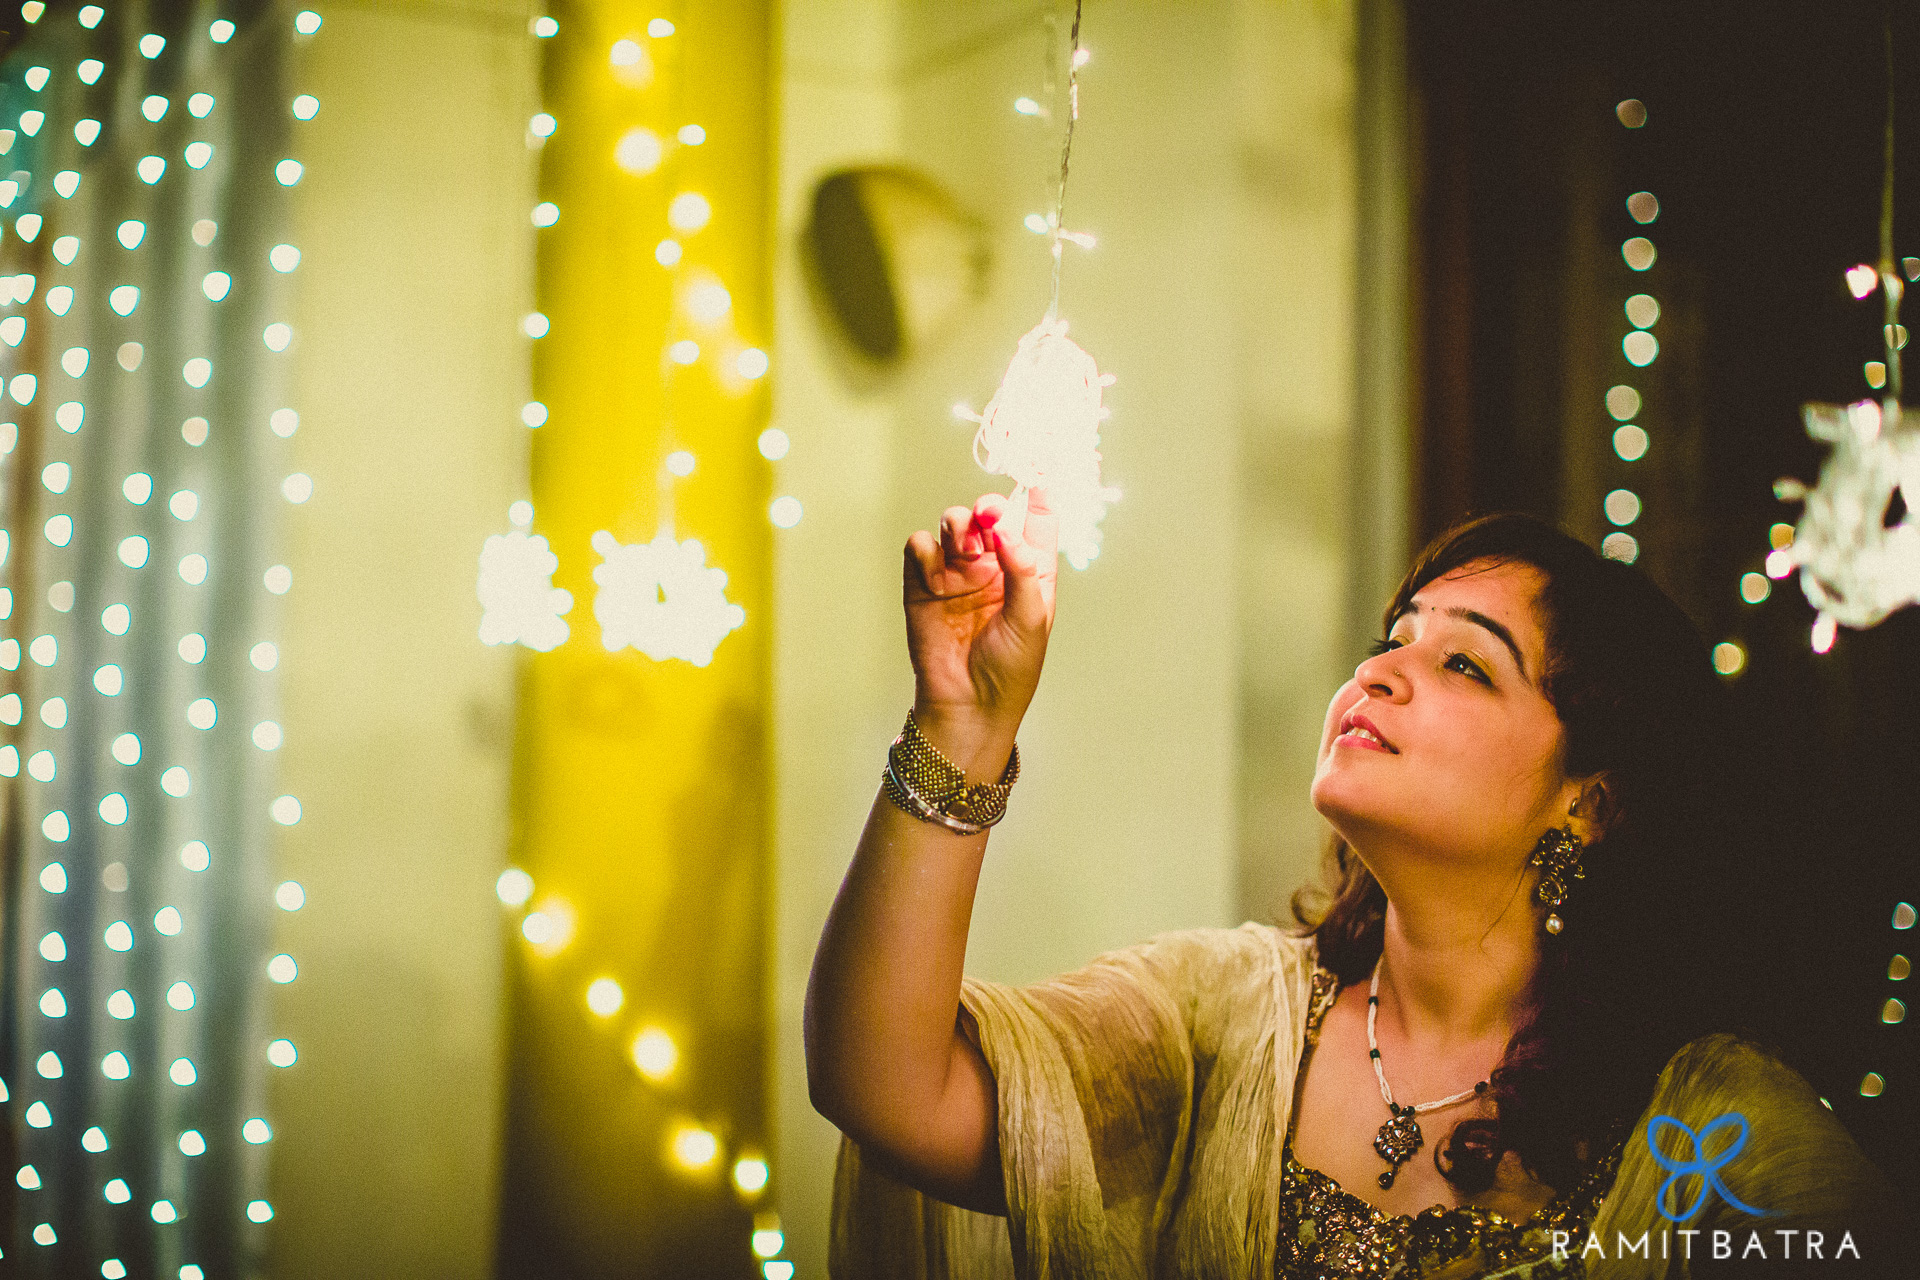 Indian Girl Poses Photograph Light Lamps Editorial Stock Photo - Stock  Image | Shutterstock